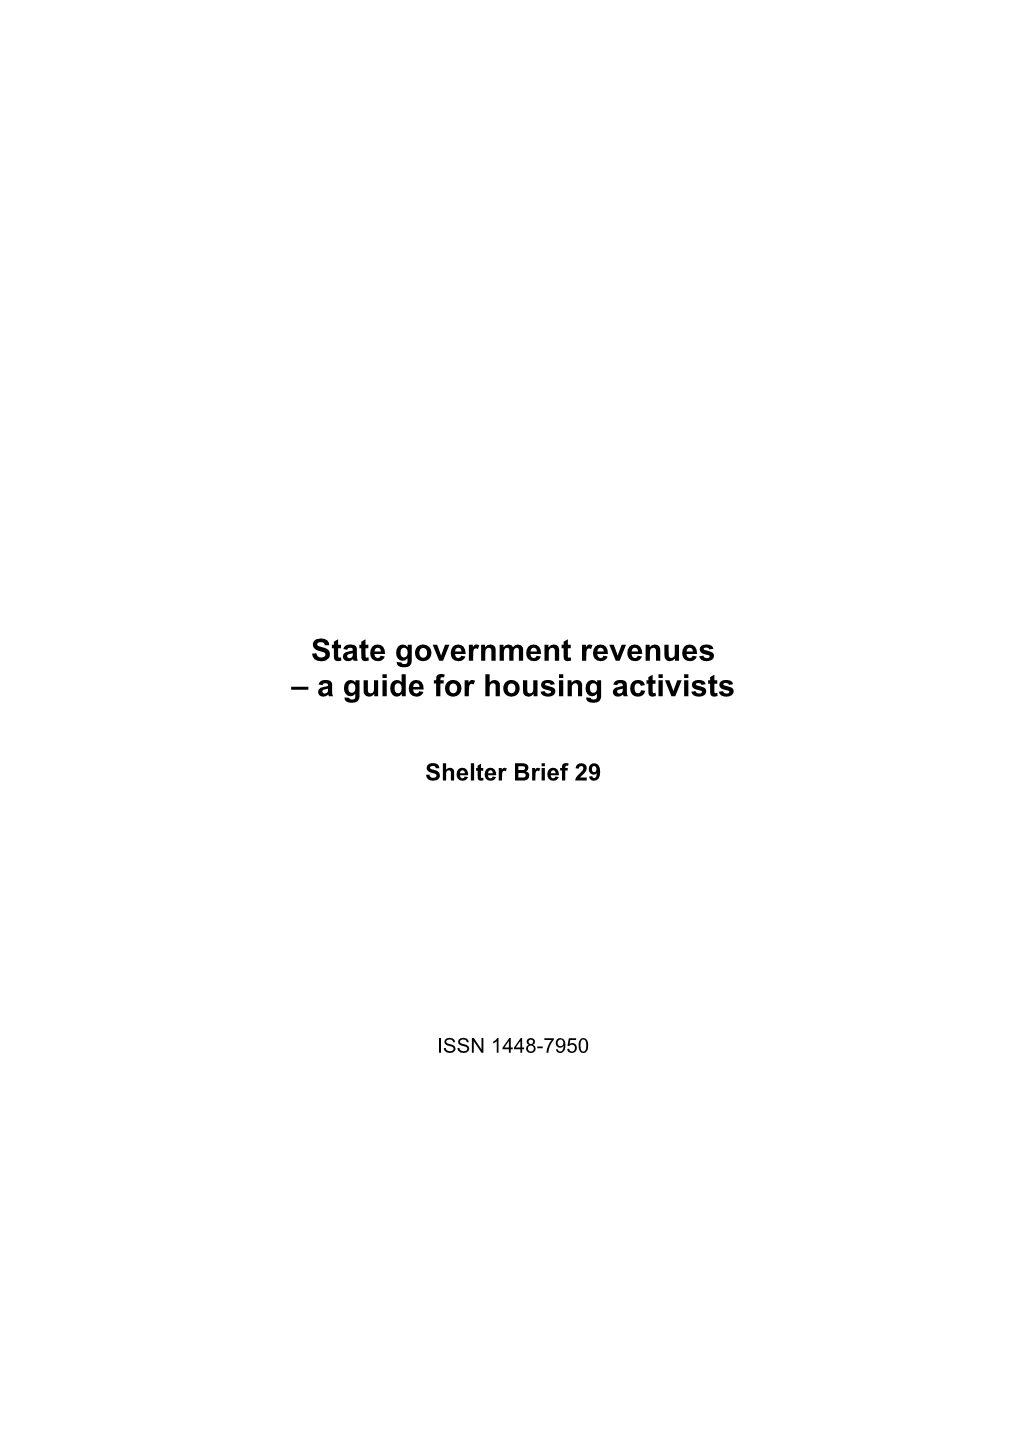 State Government Revenues – a Guide for Housing Activists